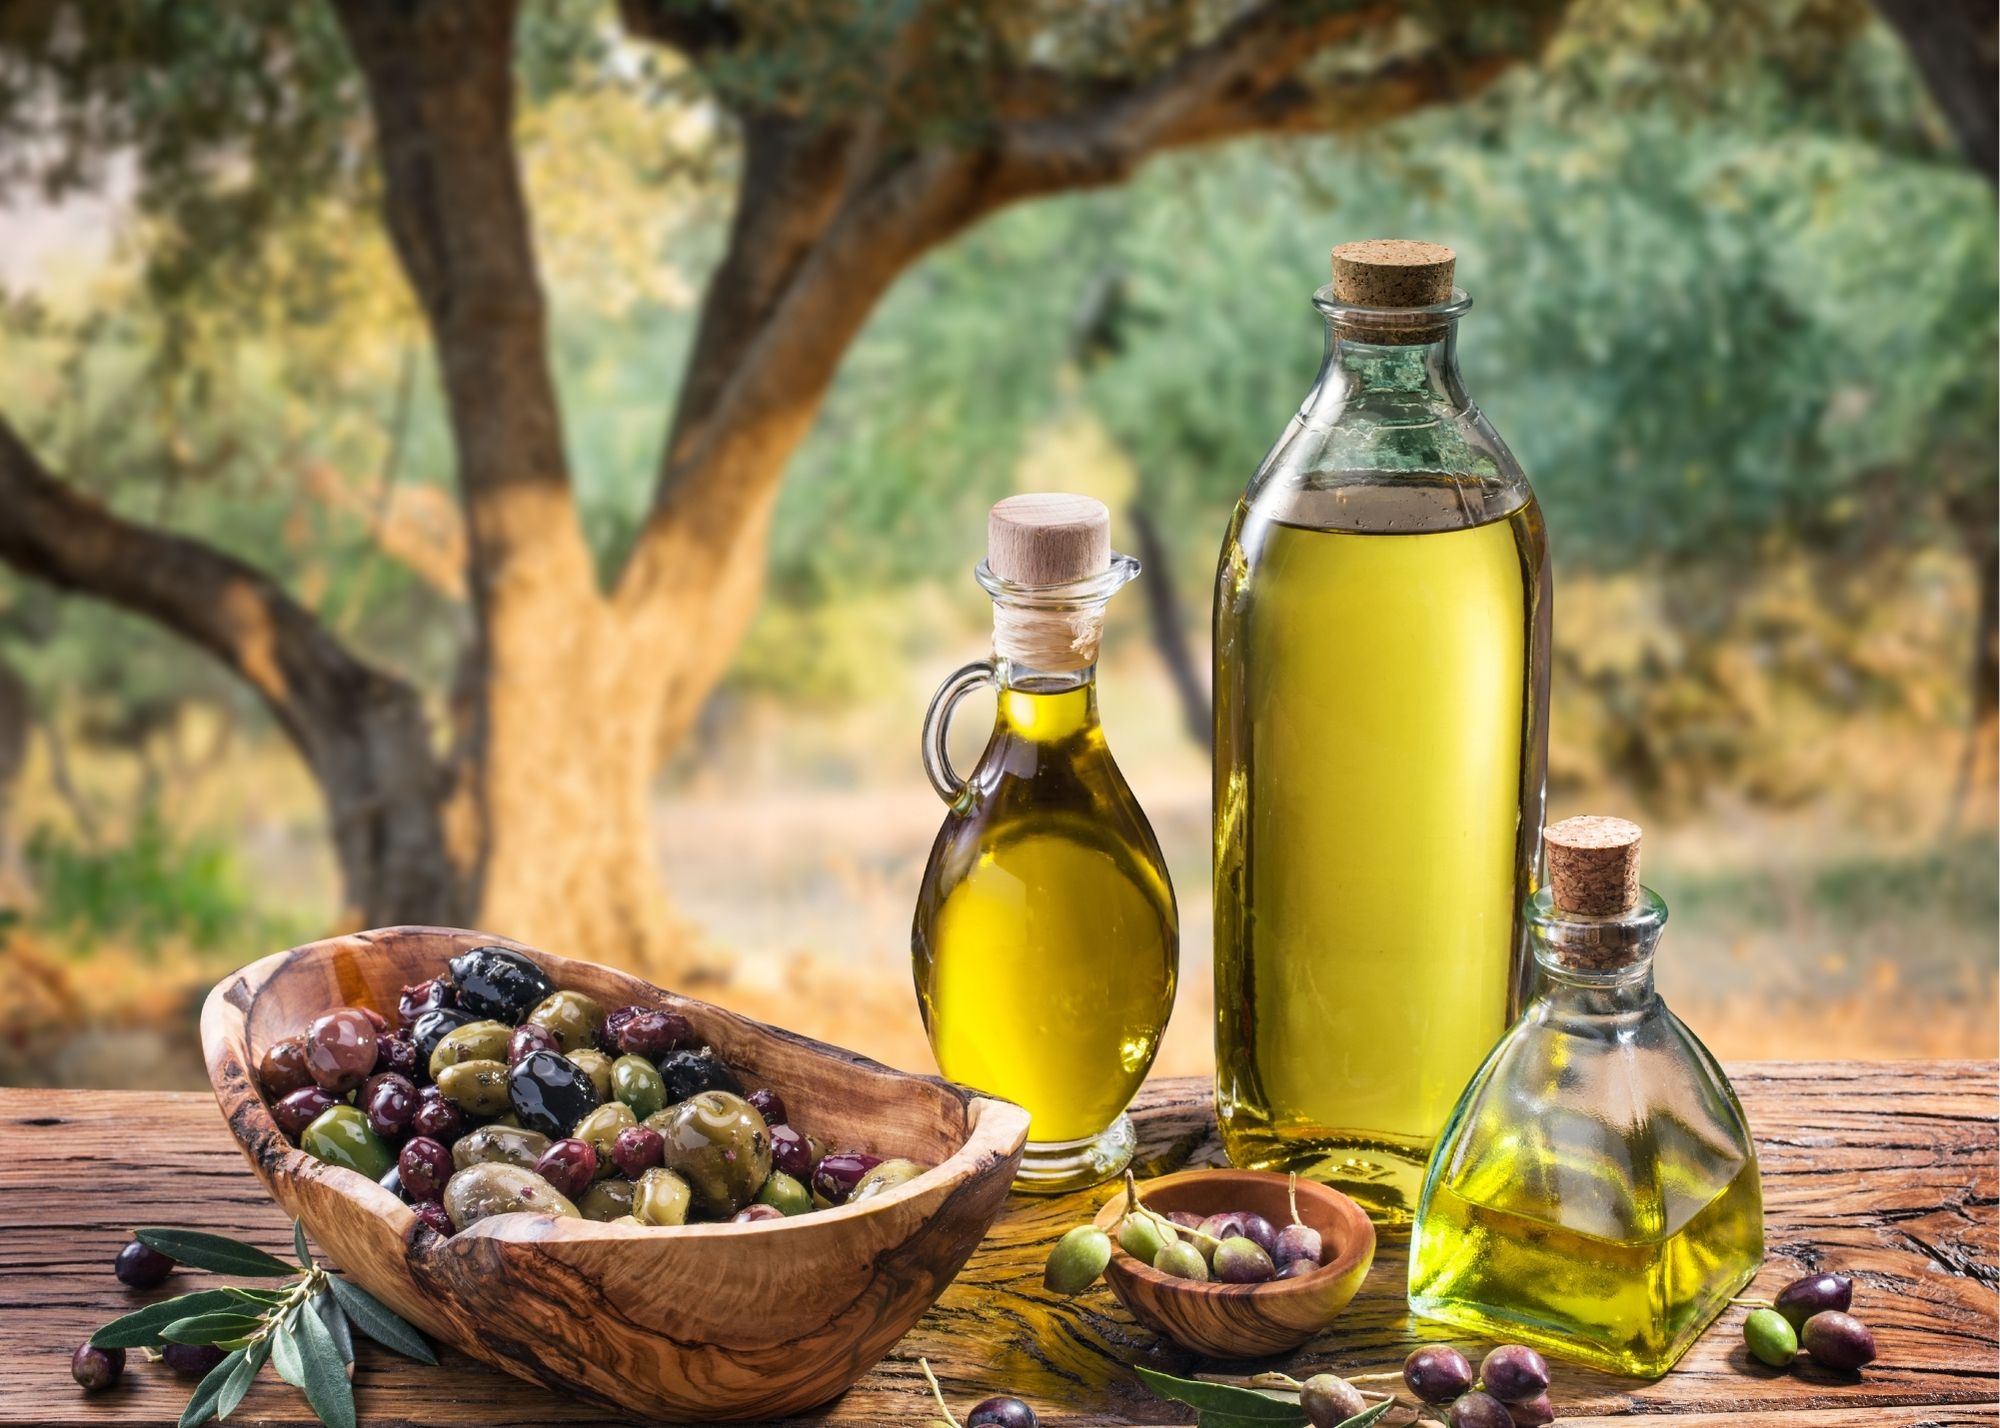 The best extra virgin olive oil